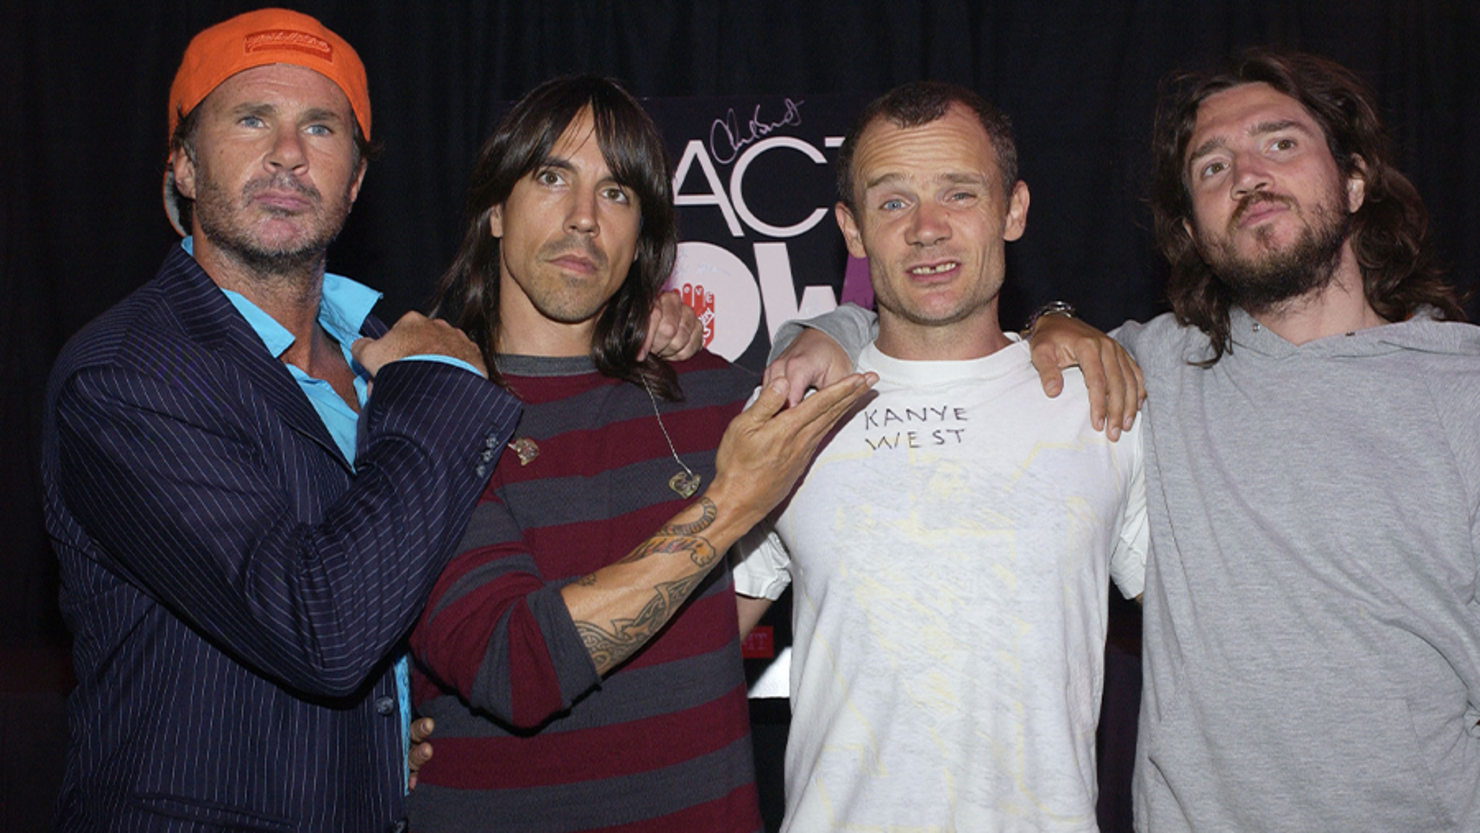 Hot Chili Peppers Announce New Album, First Single 'Black Summer' | iHeart